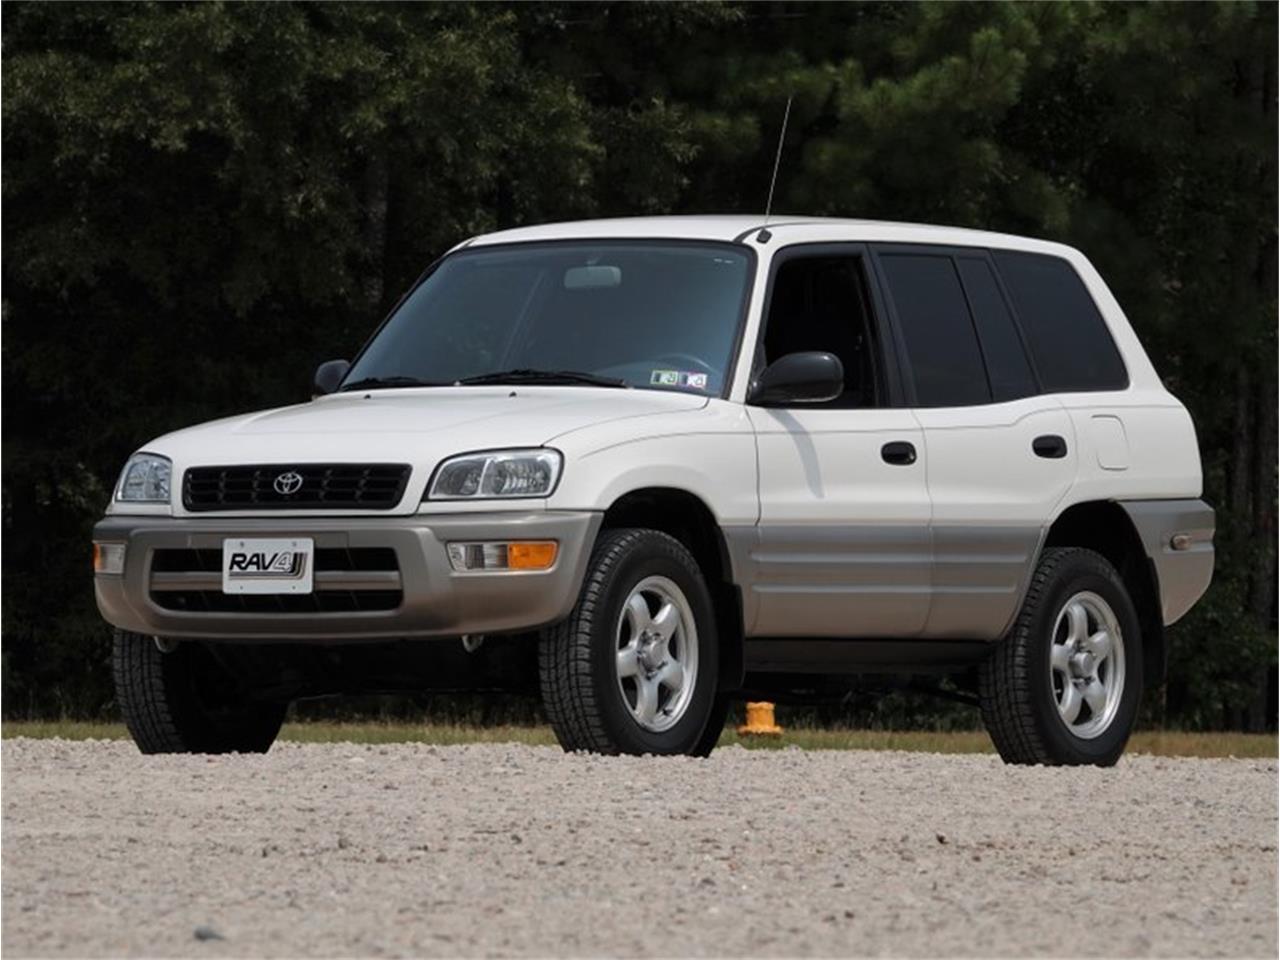 For Sale at Auction: 1998 Toyota Rav4 in Greensboro, North Carolina for sale in Greensboro, NC